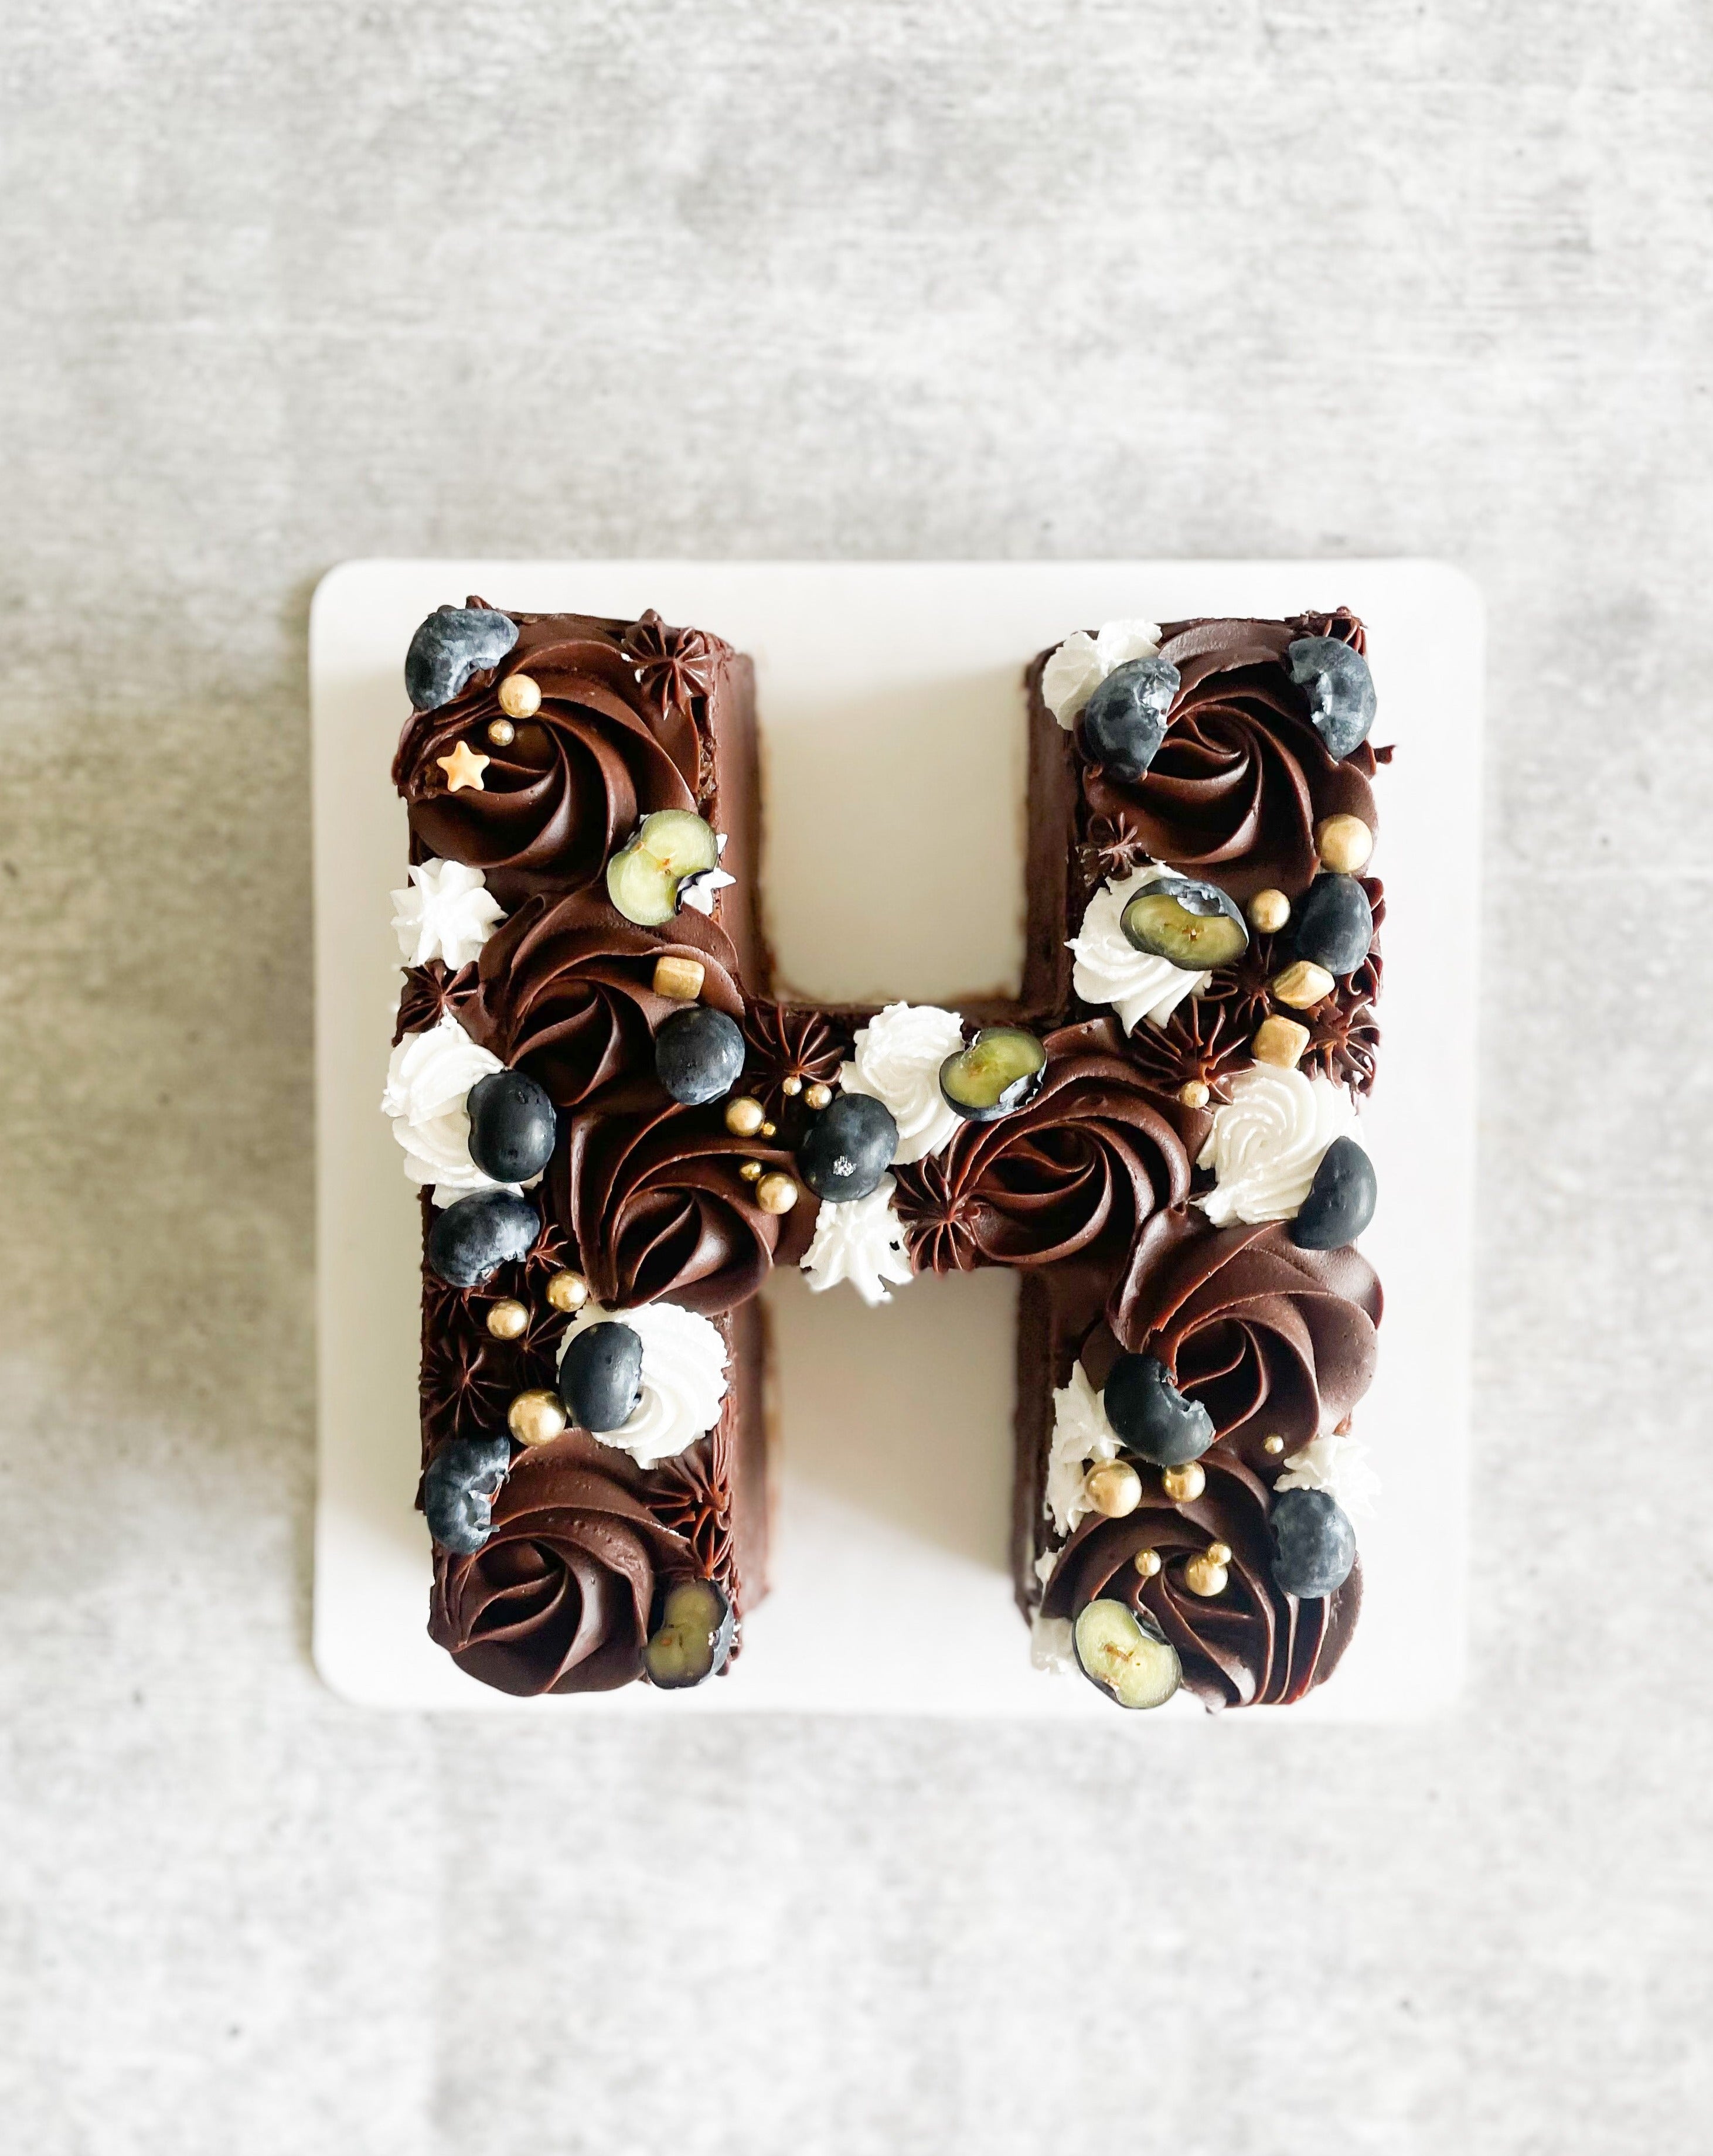 Number and letter cakes – Bakes by Steph